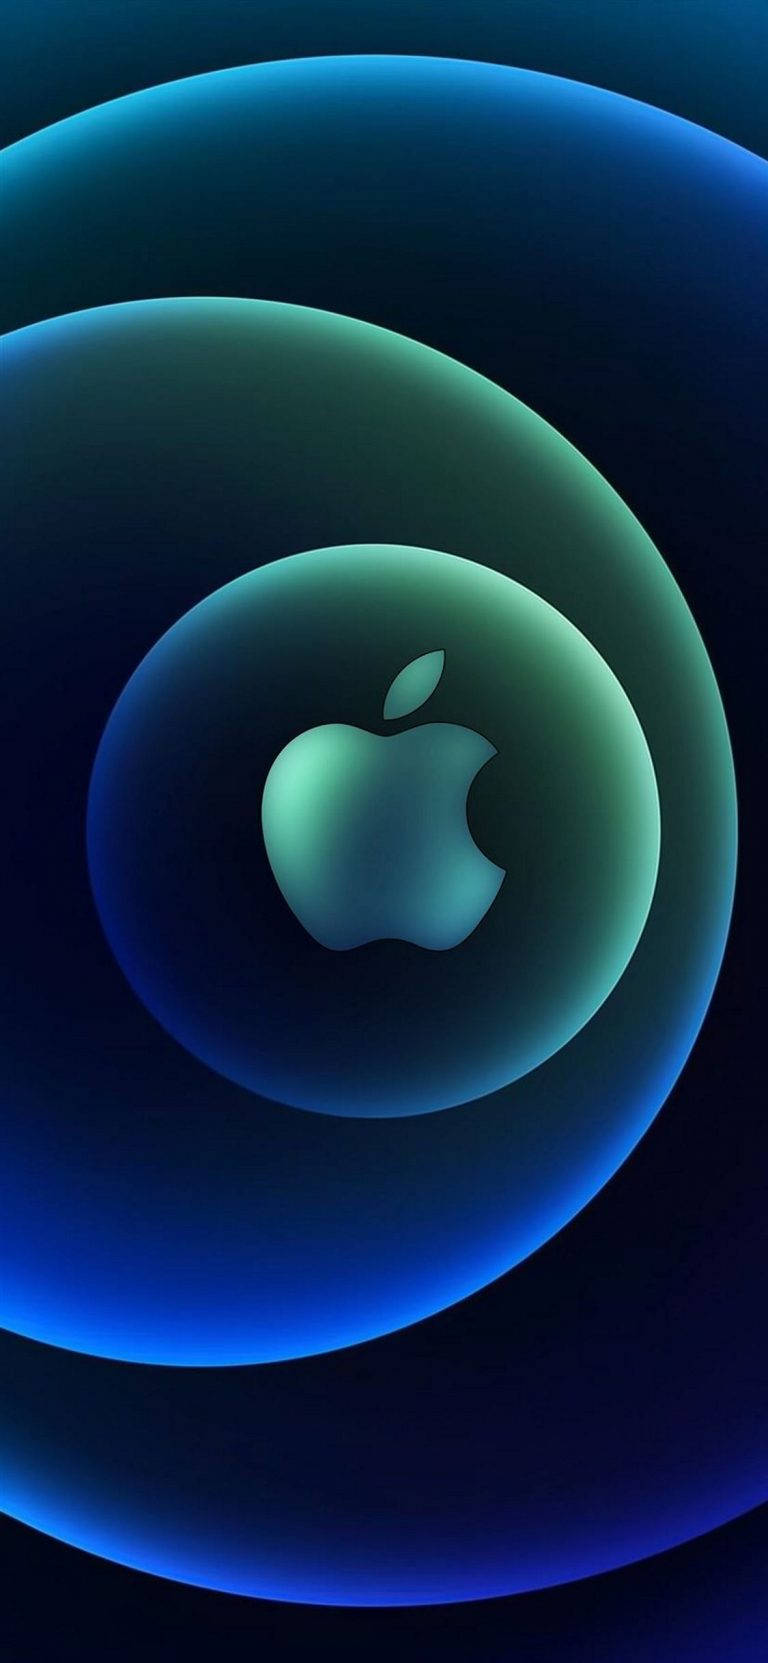 3d Apple Iphone Logo In Bubbles Background